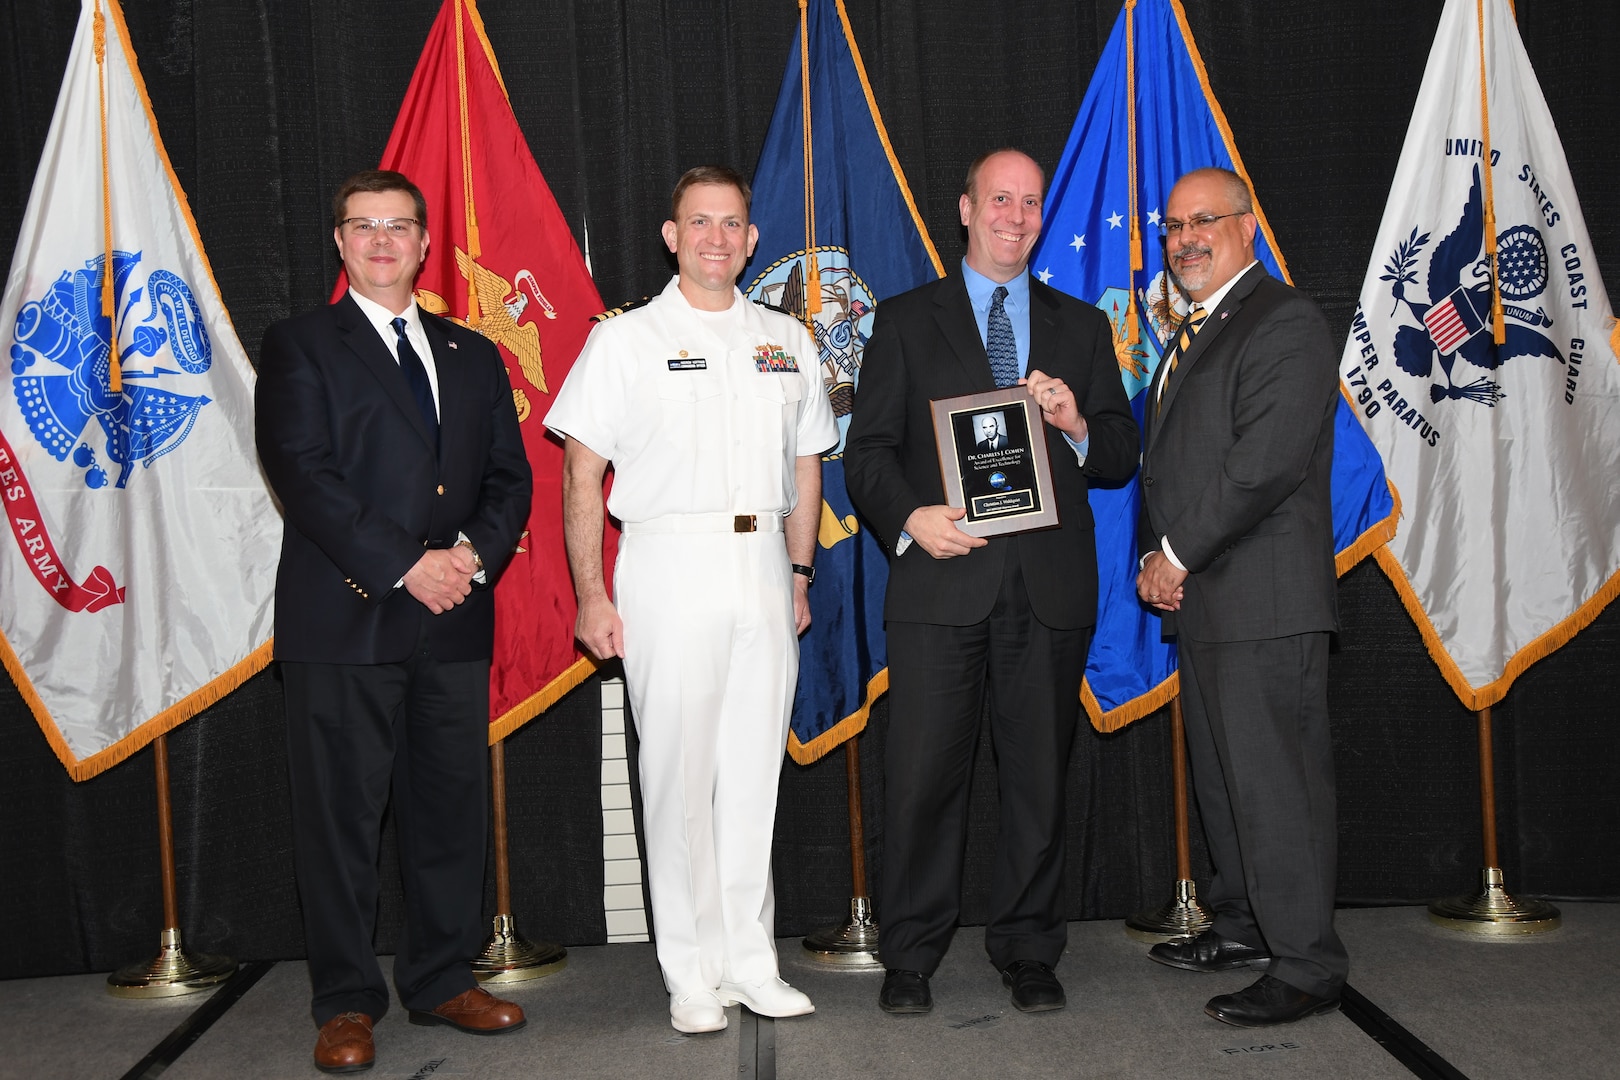 IMAGE: Christian Wahlquist is presented the Dr. Charles J. Cohen Award at Naval Surface Warfare Center Dahlgren Division's annual awards ceremony, Apr. 26 at the Fredericksburg Expo and Conference Center.

The award recognizes those who fundamentally impact science or technology with work that also measurably impacts capability.